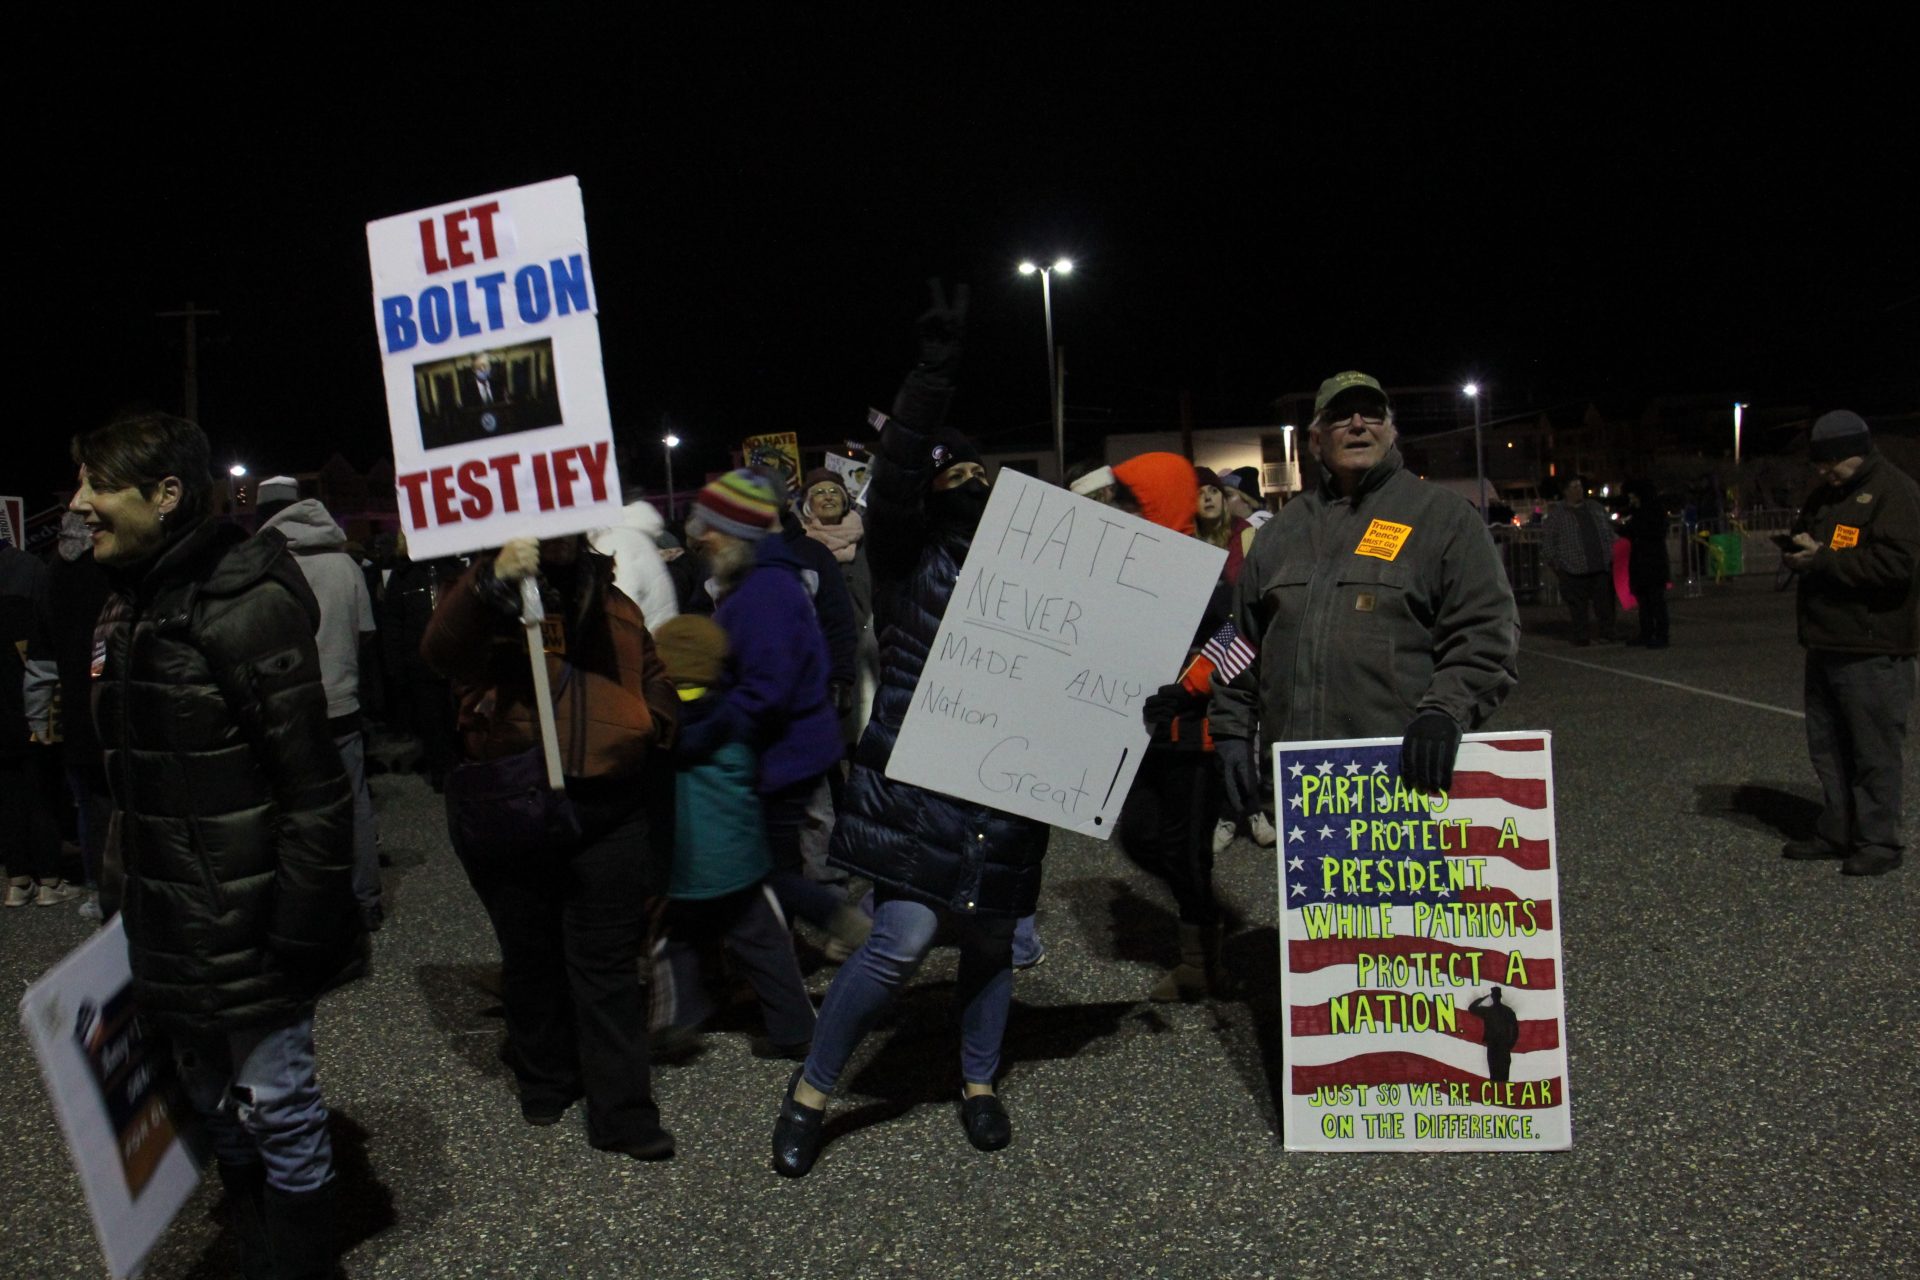 Protesters gather in a parking lot near the Wildwoods Convention Center, where President Trump was holding a rally. (Emma Lee/WHYY)